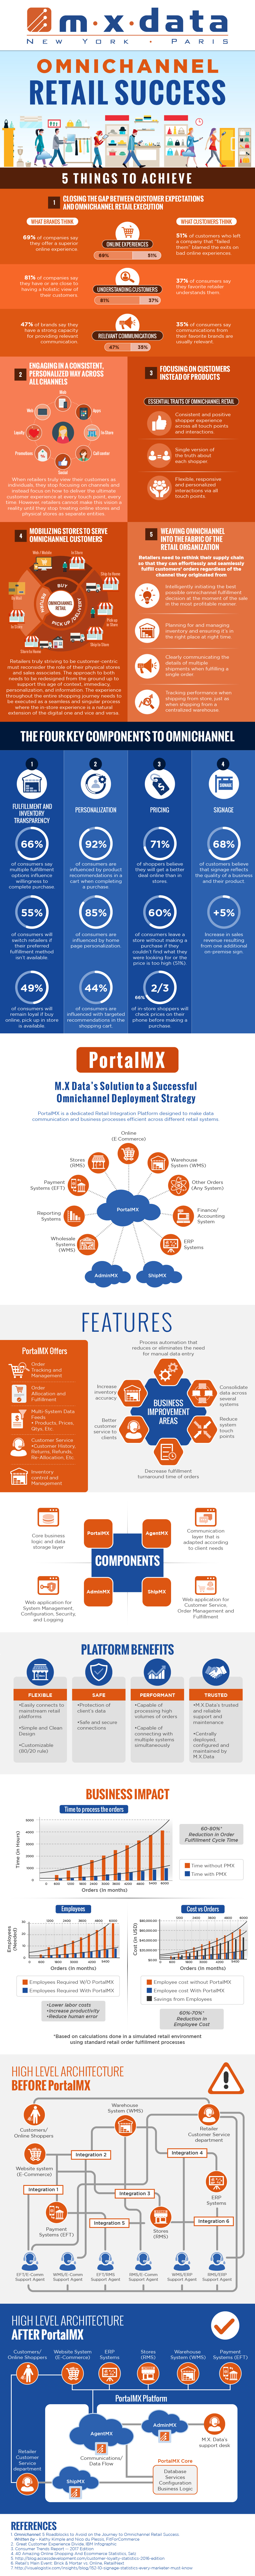 Guide To Omnichannel Retail Success Infographic